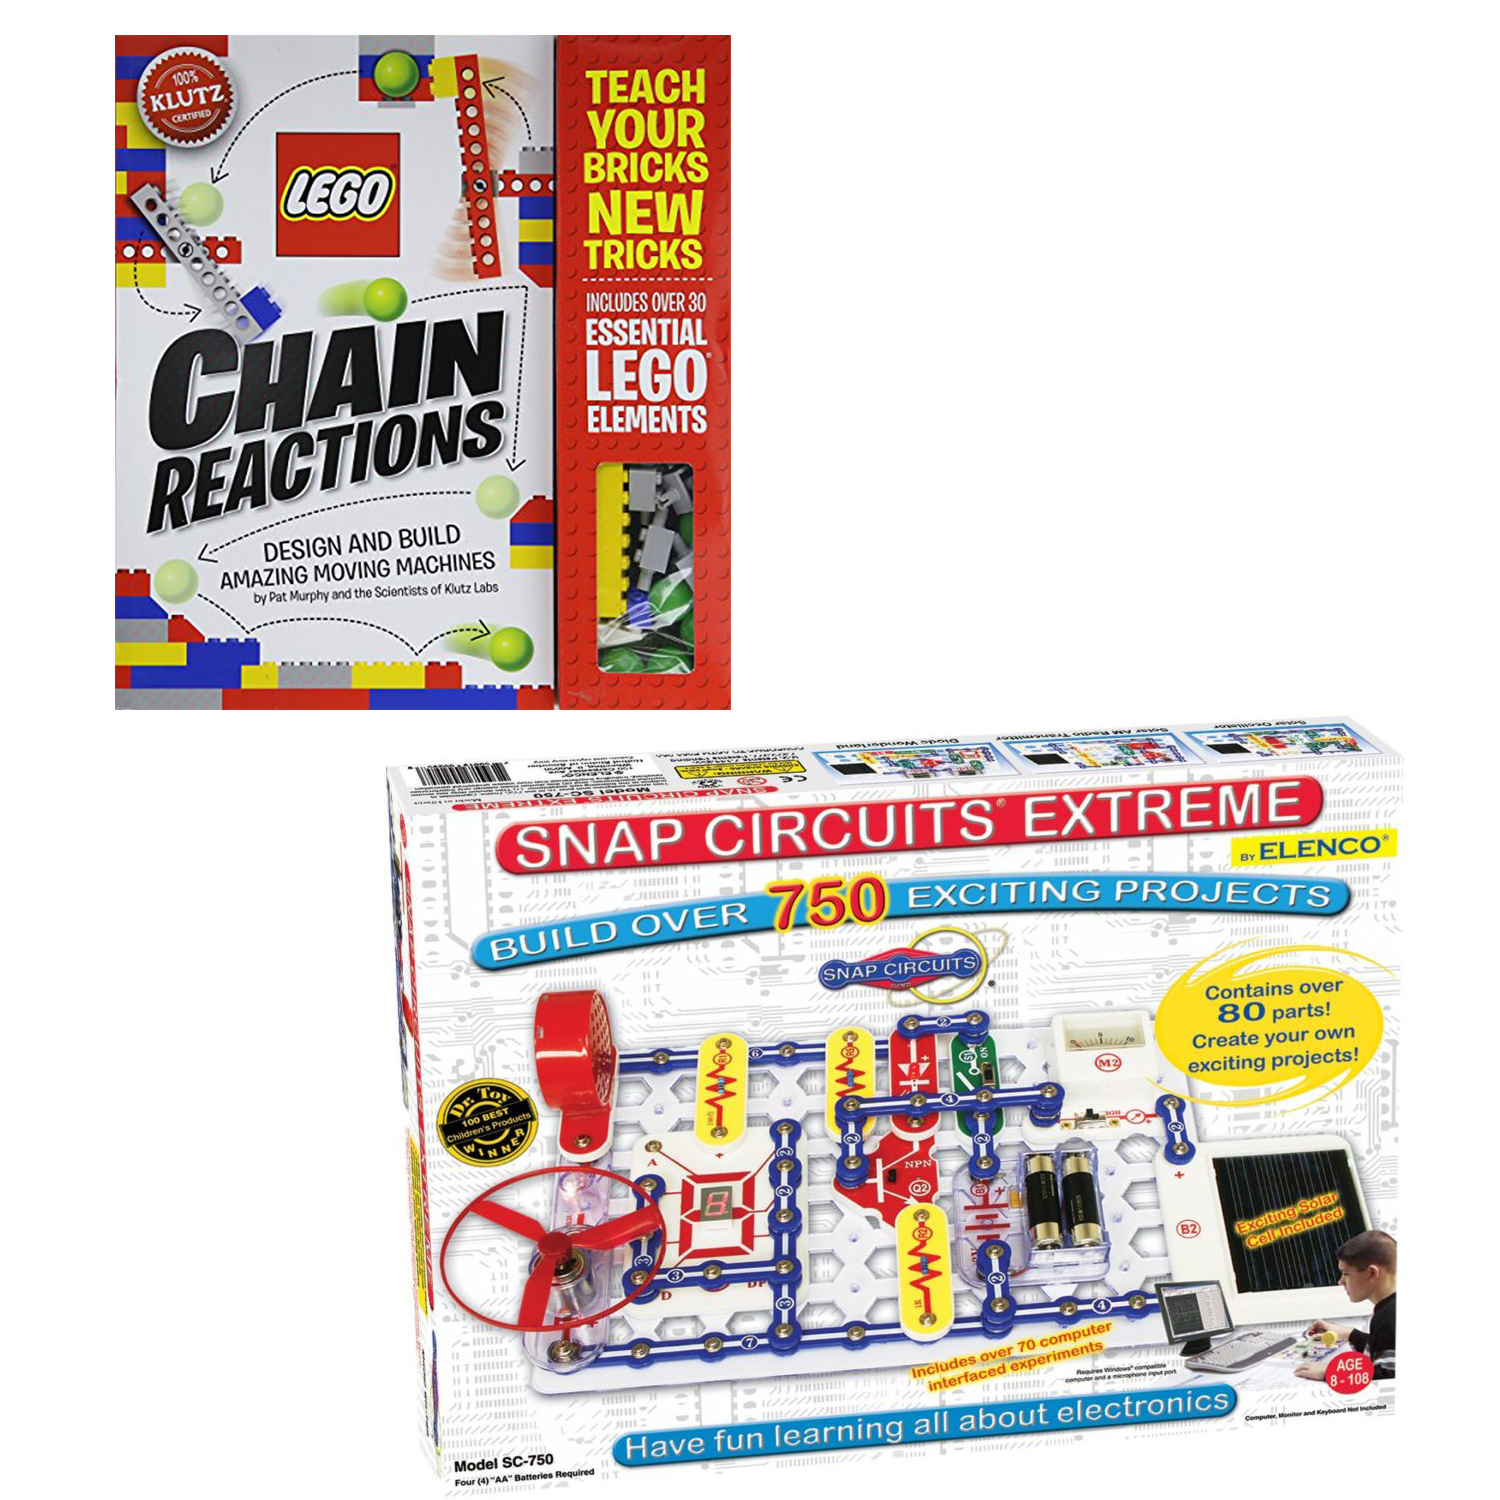 Lego Chain Reactions and Mindstorms